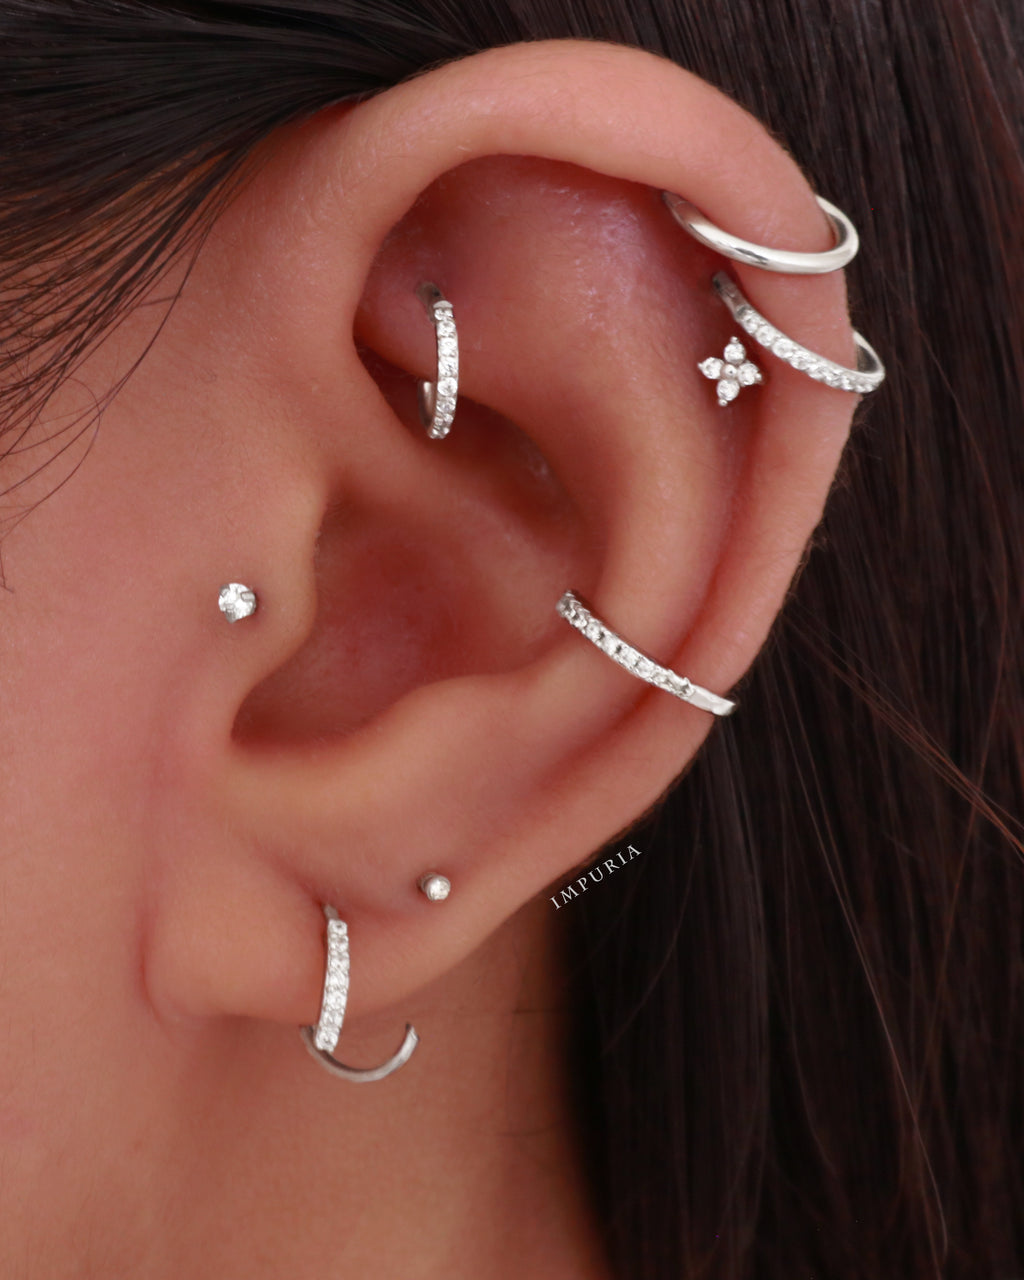 double cartilage spiral piercing